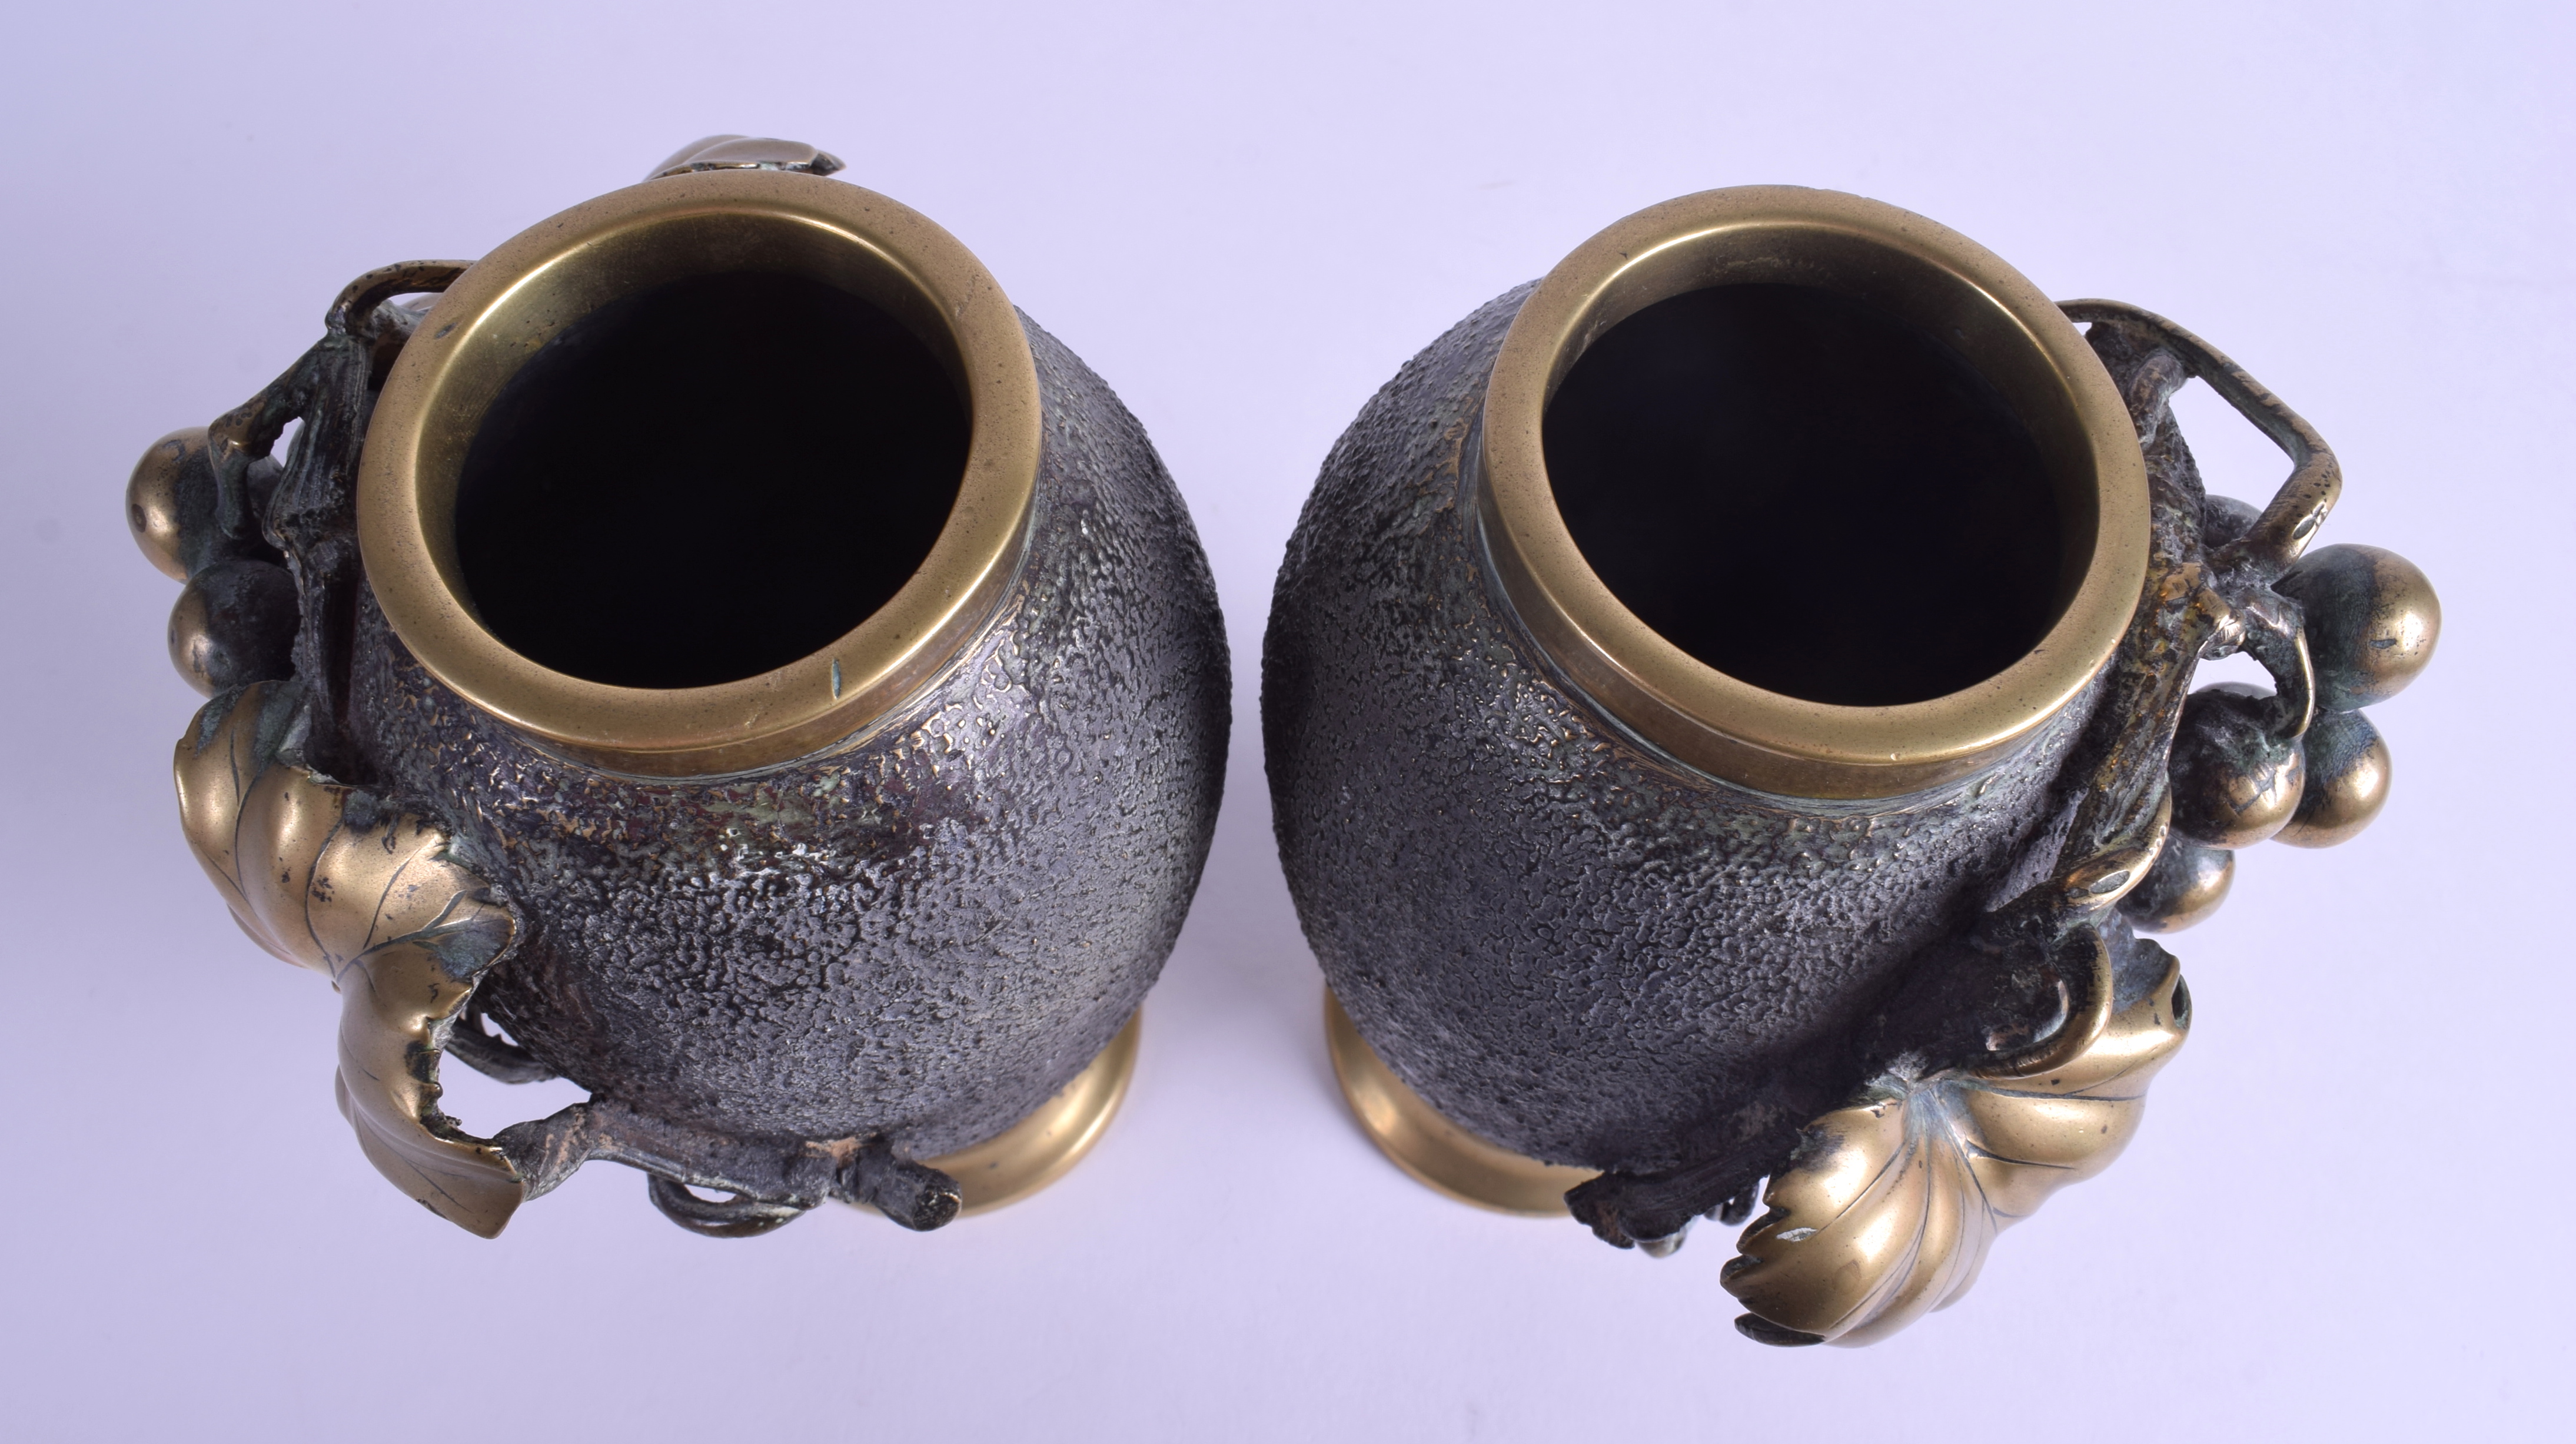 A PAIR OF 19TH CENTURY JAPANESE MEIJI PERIOD BRONZE VASES overlaid with berries and vines. 16 cm hi - Image 4 of 4